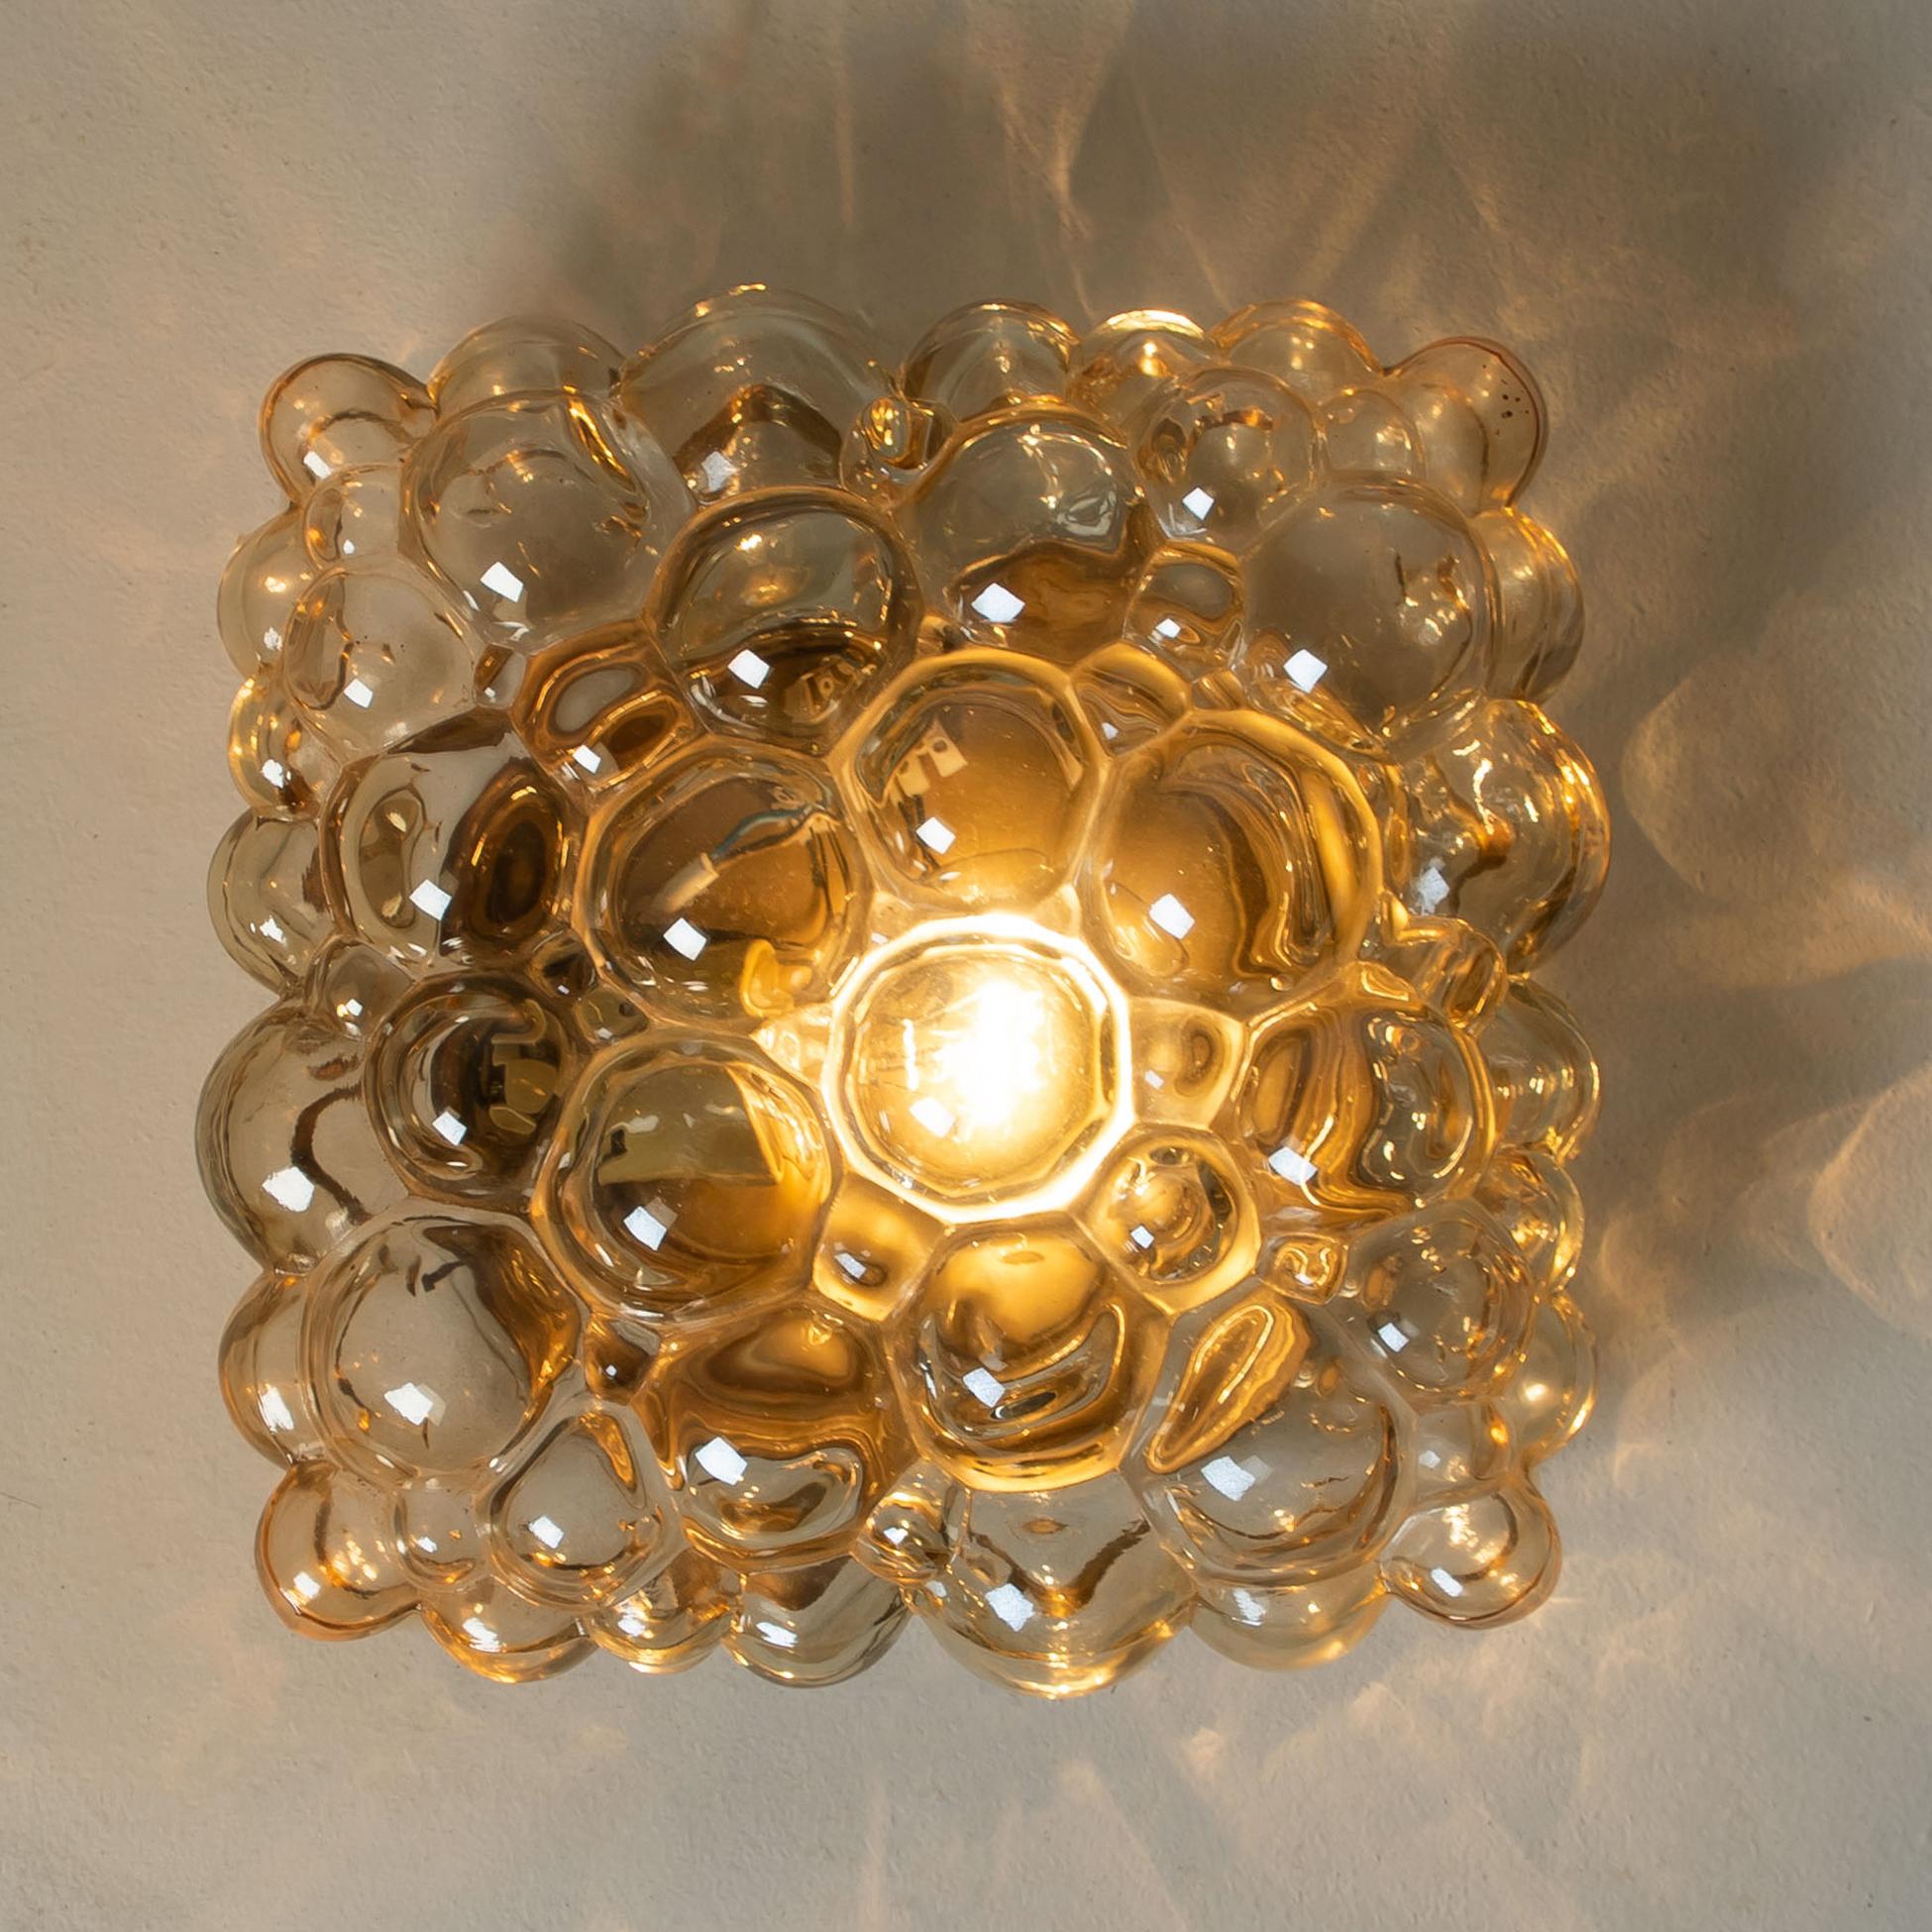 Beautiful high-end large bubble wall lights or flush mounts by Helena Tynell for Glashütte Limburg, Germany, 1960s. 
A design Classic, made of glossy amber bubble glass.
 
The price is for a pair. They will be sold individually or as pair. Can